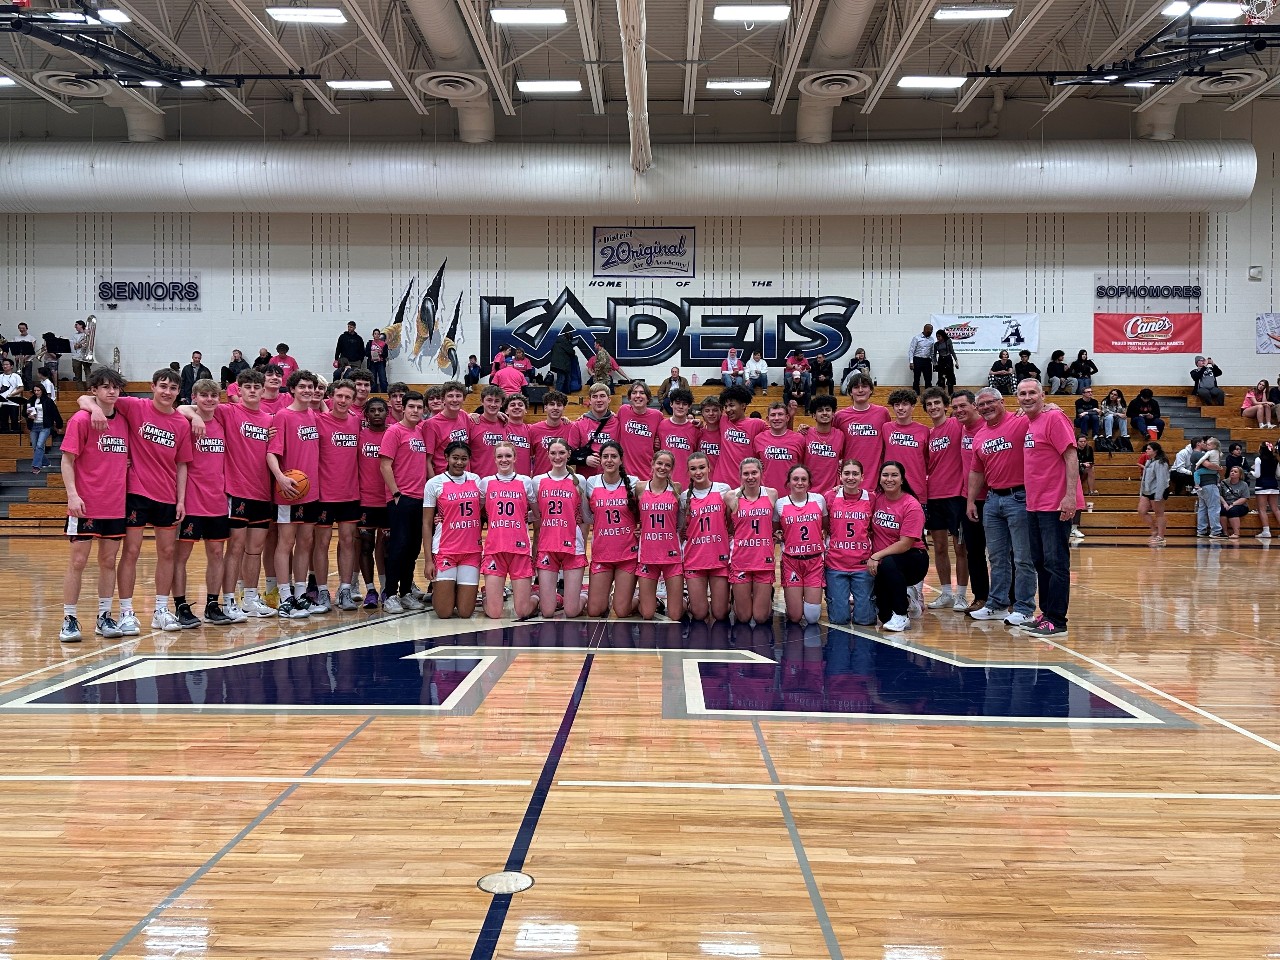 Group shot of basketball teams in pink